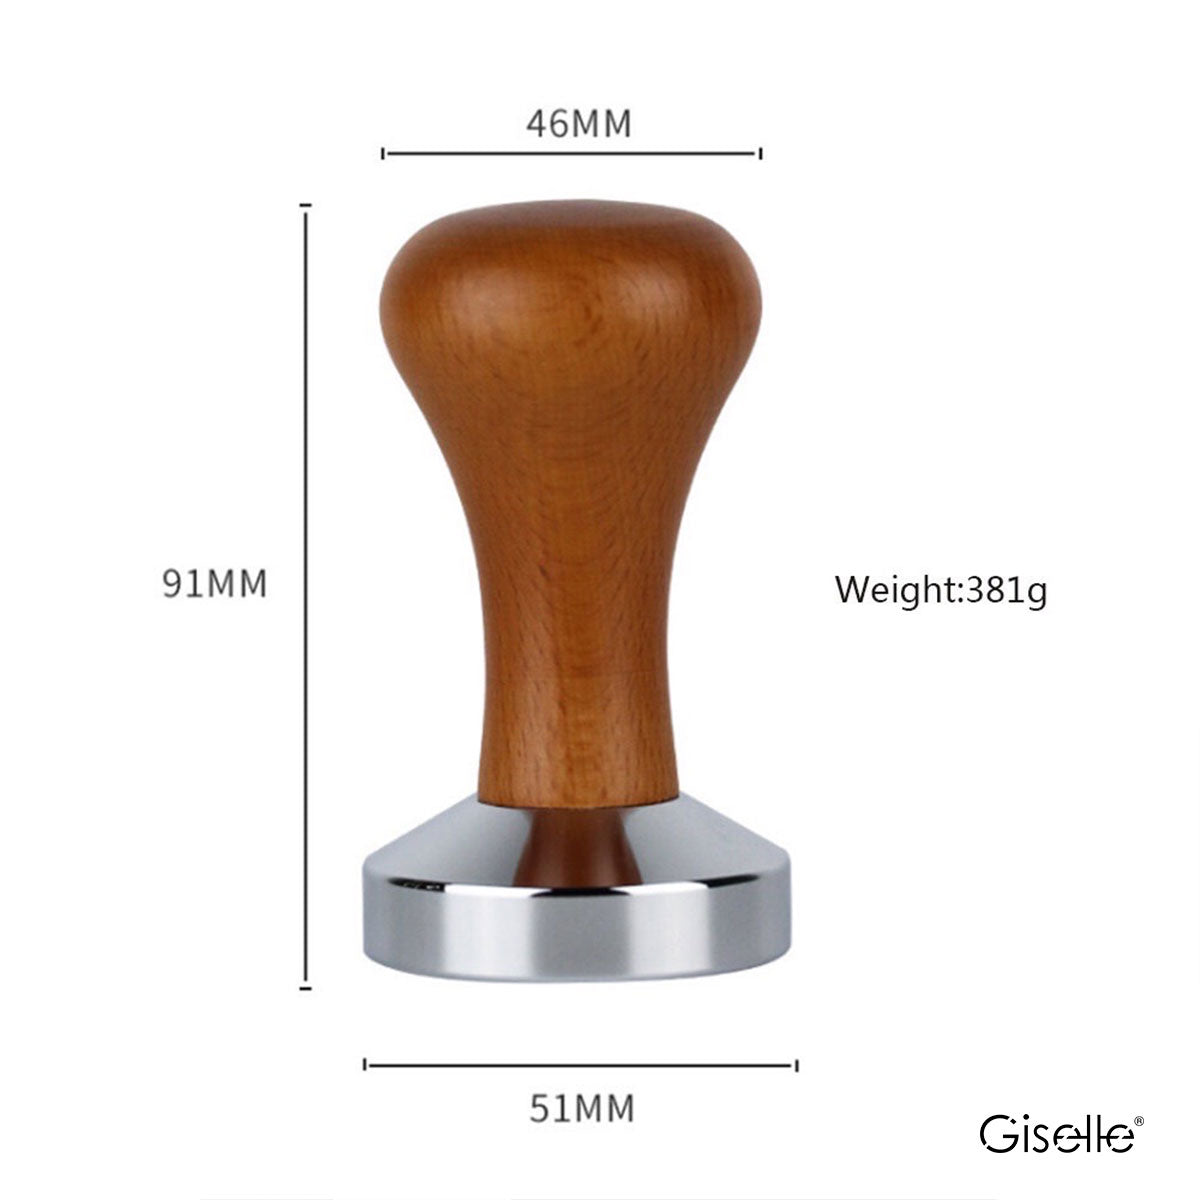 Giselle Espresso Coffee Accessories - 304 Barista Tamper 51mm, Drip Coffee Paper Filter (CFT0001 / CFF0001PP)